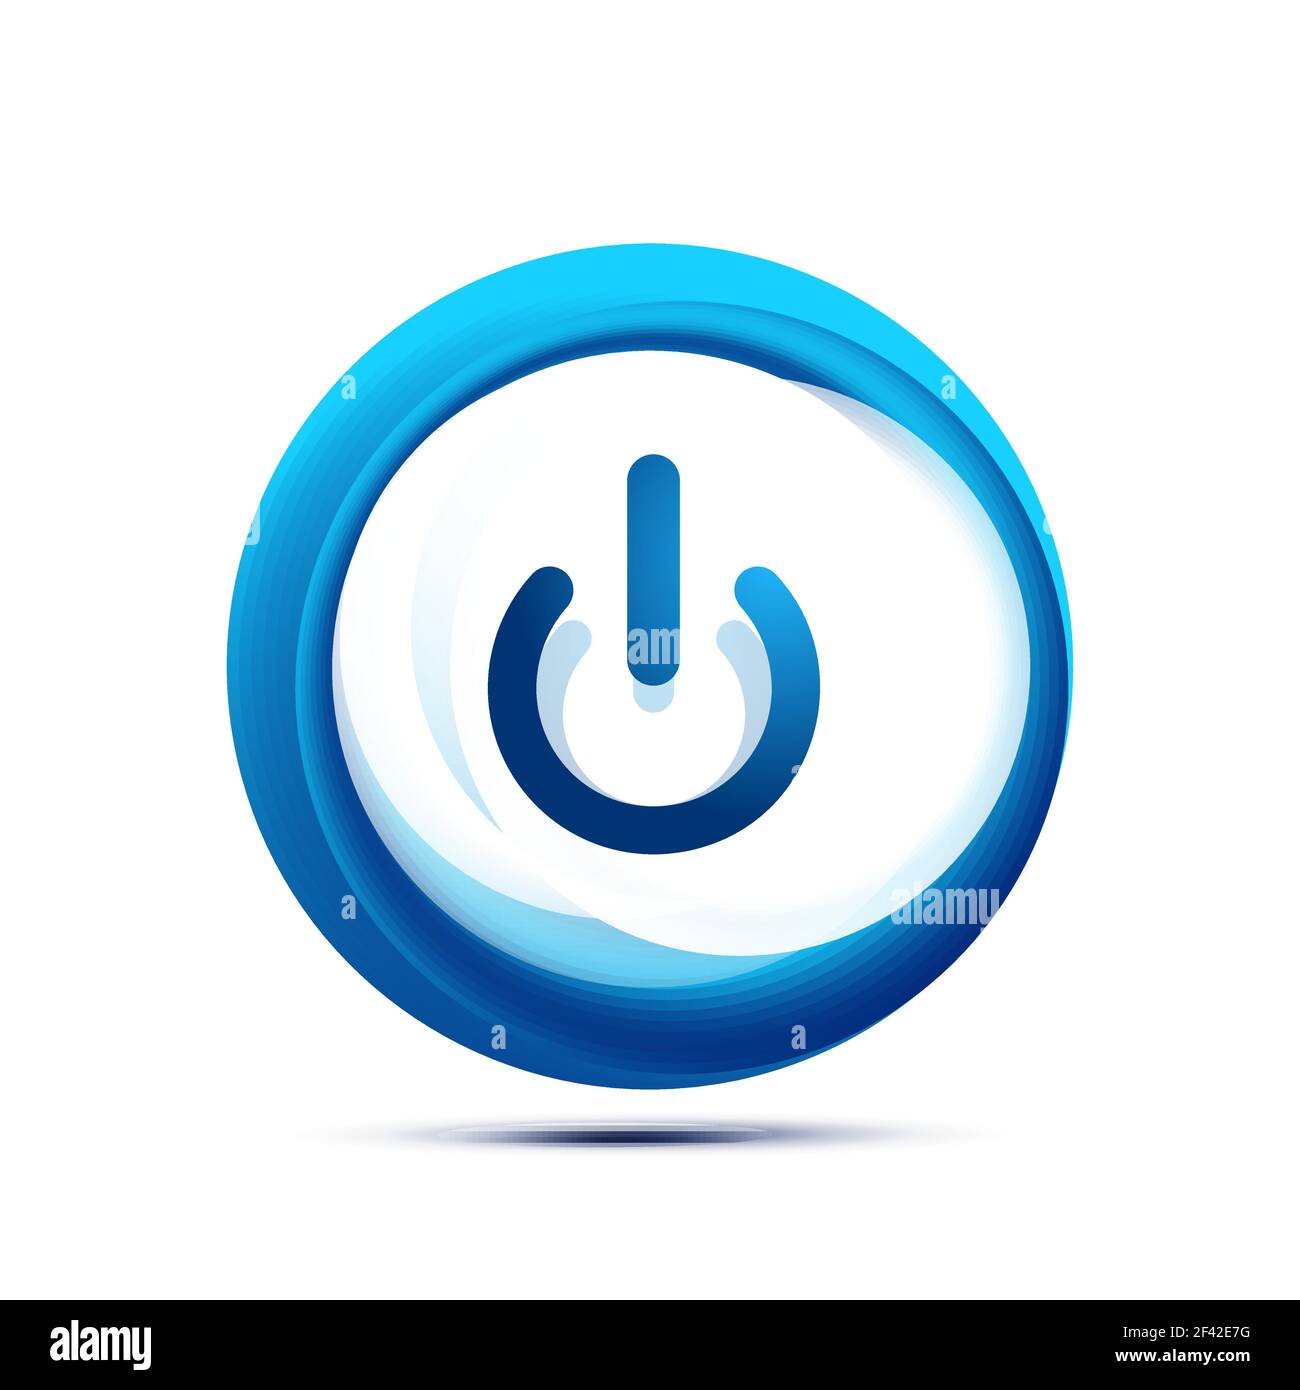 14 Windows 7 Start Icon Images - Logo Windows 7 Bmp Png,Windows Start Button  Png - free transparent png images - pngaaa.com